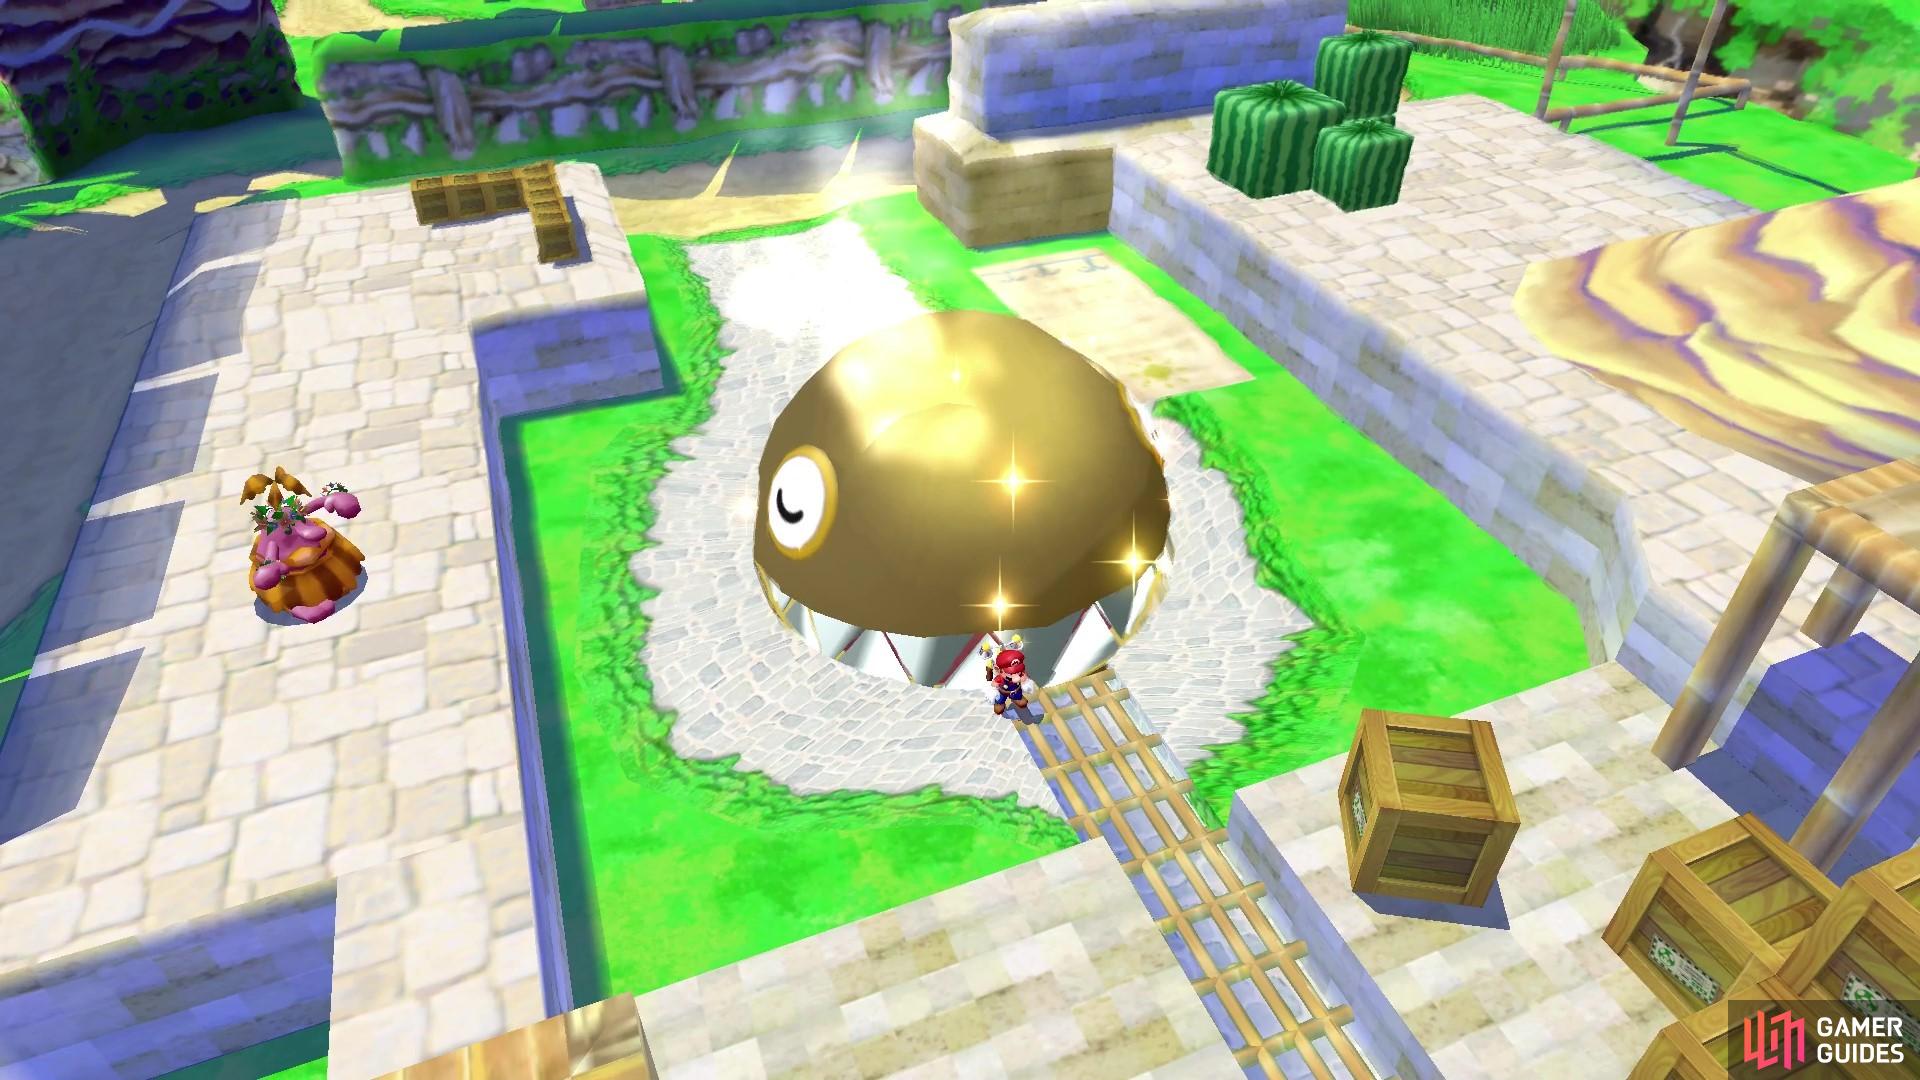 The Chain Chomp will be shiny and golden once he’s had his bath!